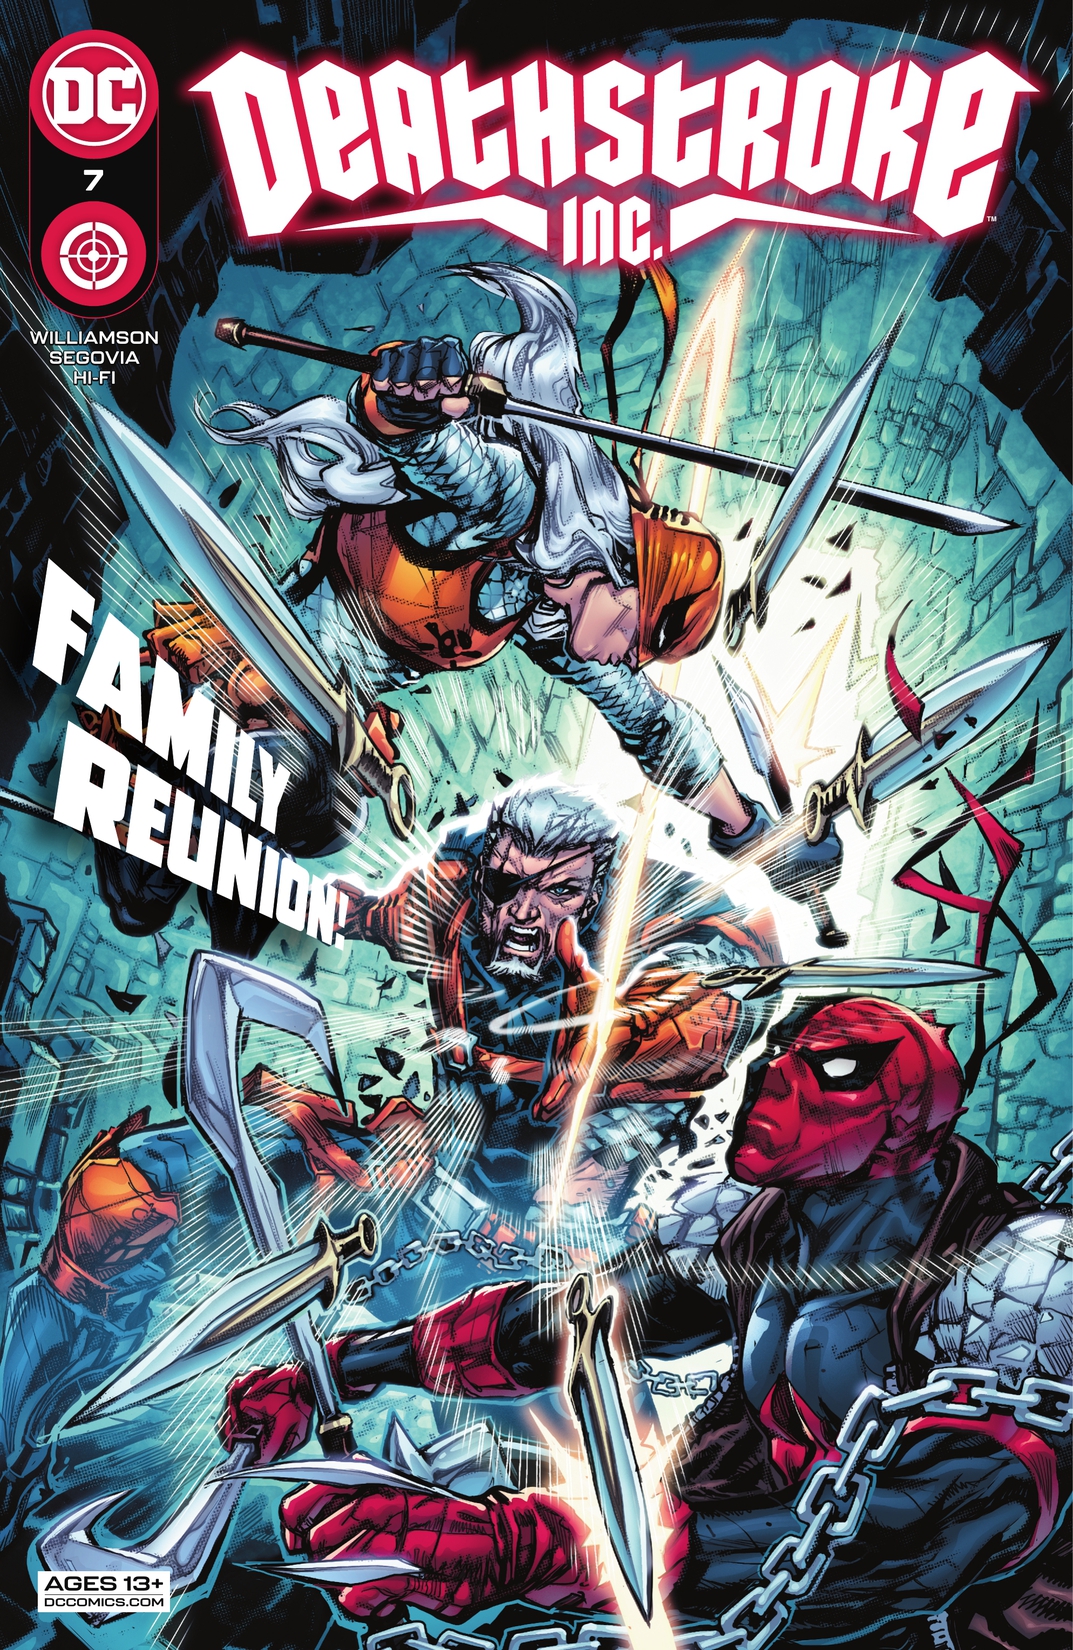 Deathstroke Inc. #7 preview images